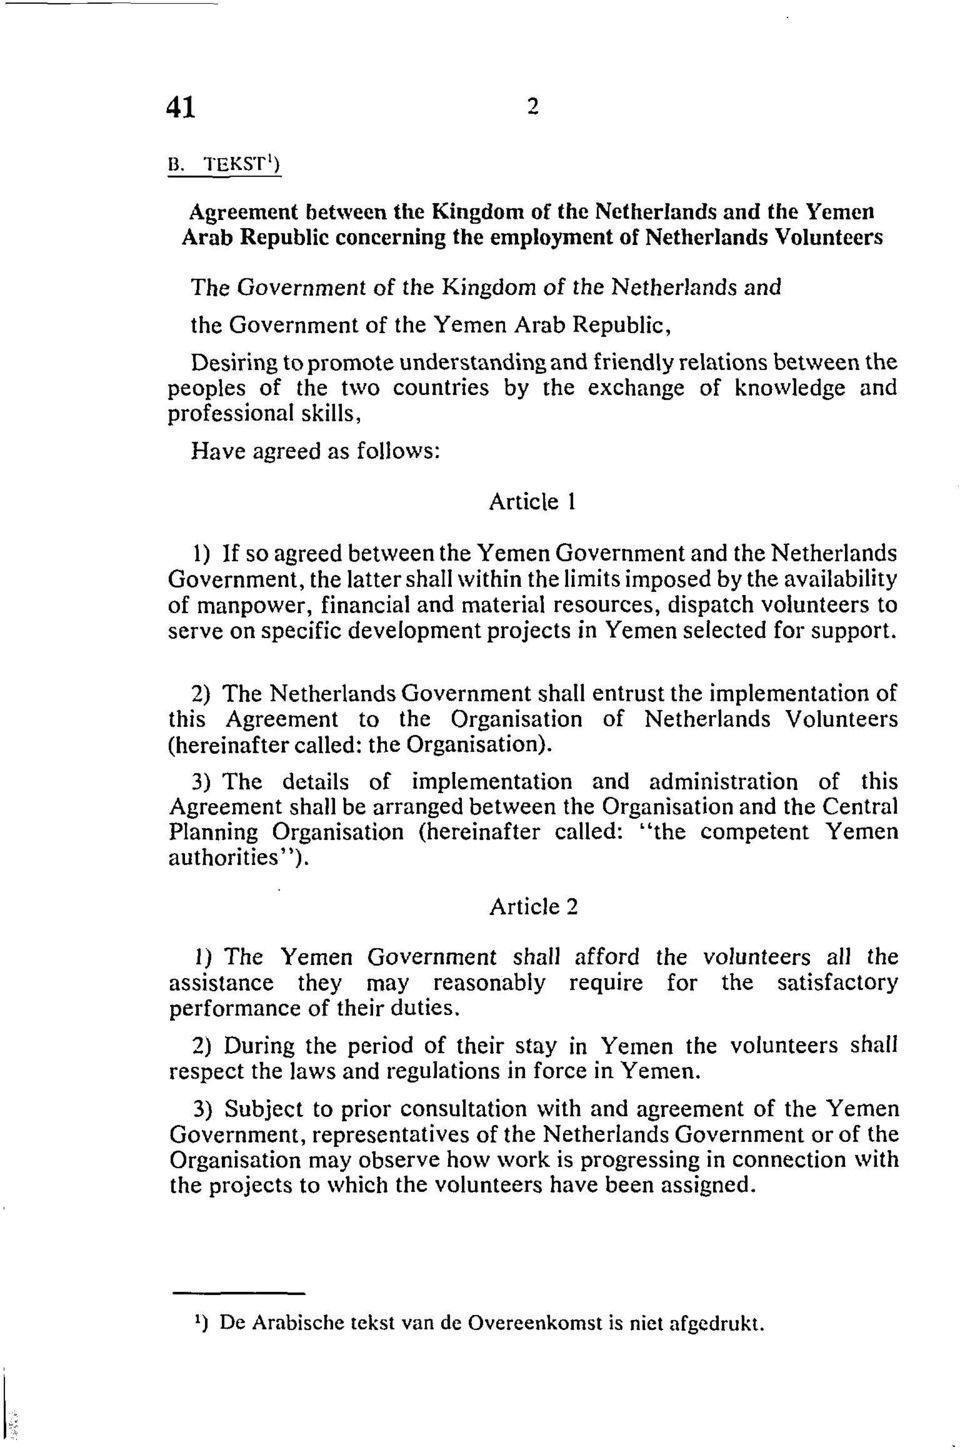 agreed as follows: Article 1 1) If so agreed between the Yemen Government and the Netherlands Government, the latter shall within the limits imposed by the availability of manpower, financial and